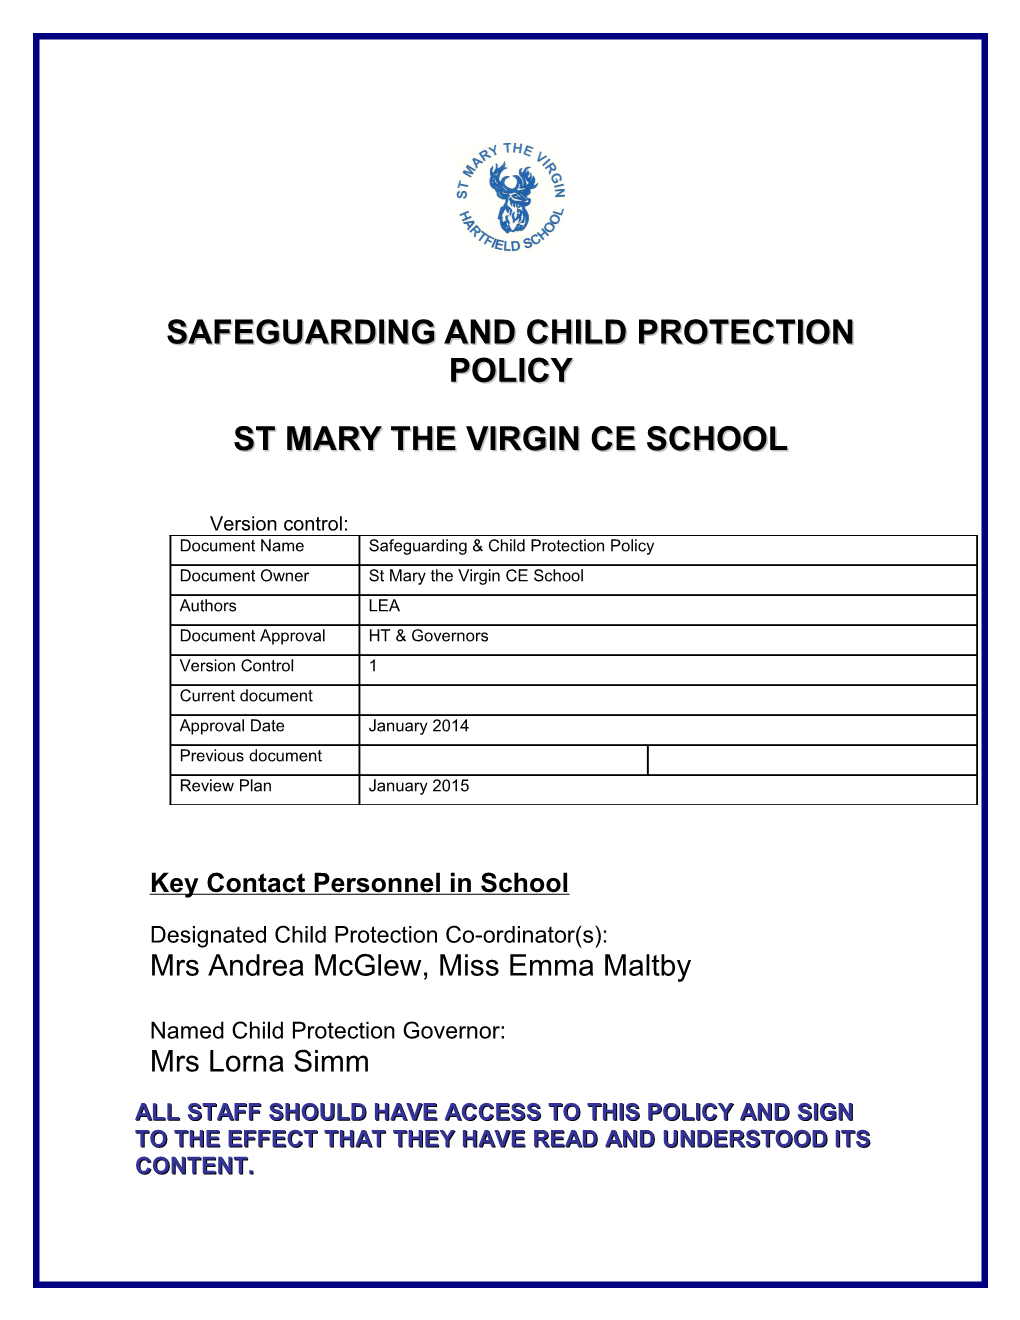 Model Child Protection and Safeguarding Policy for Schools 2013